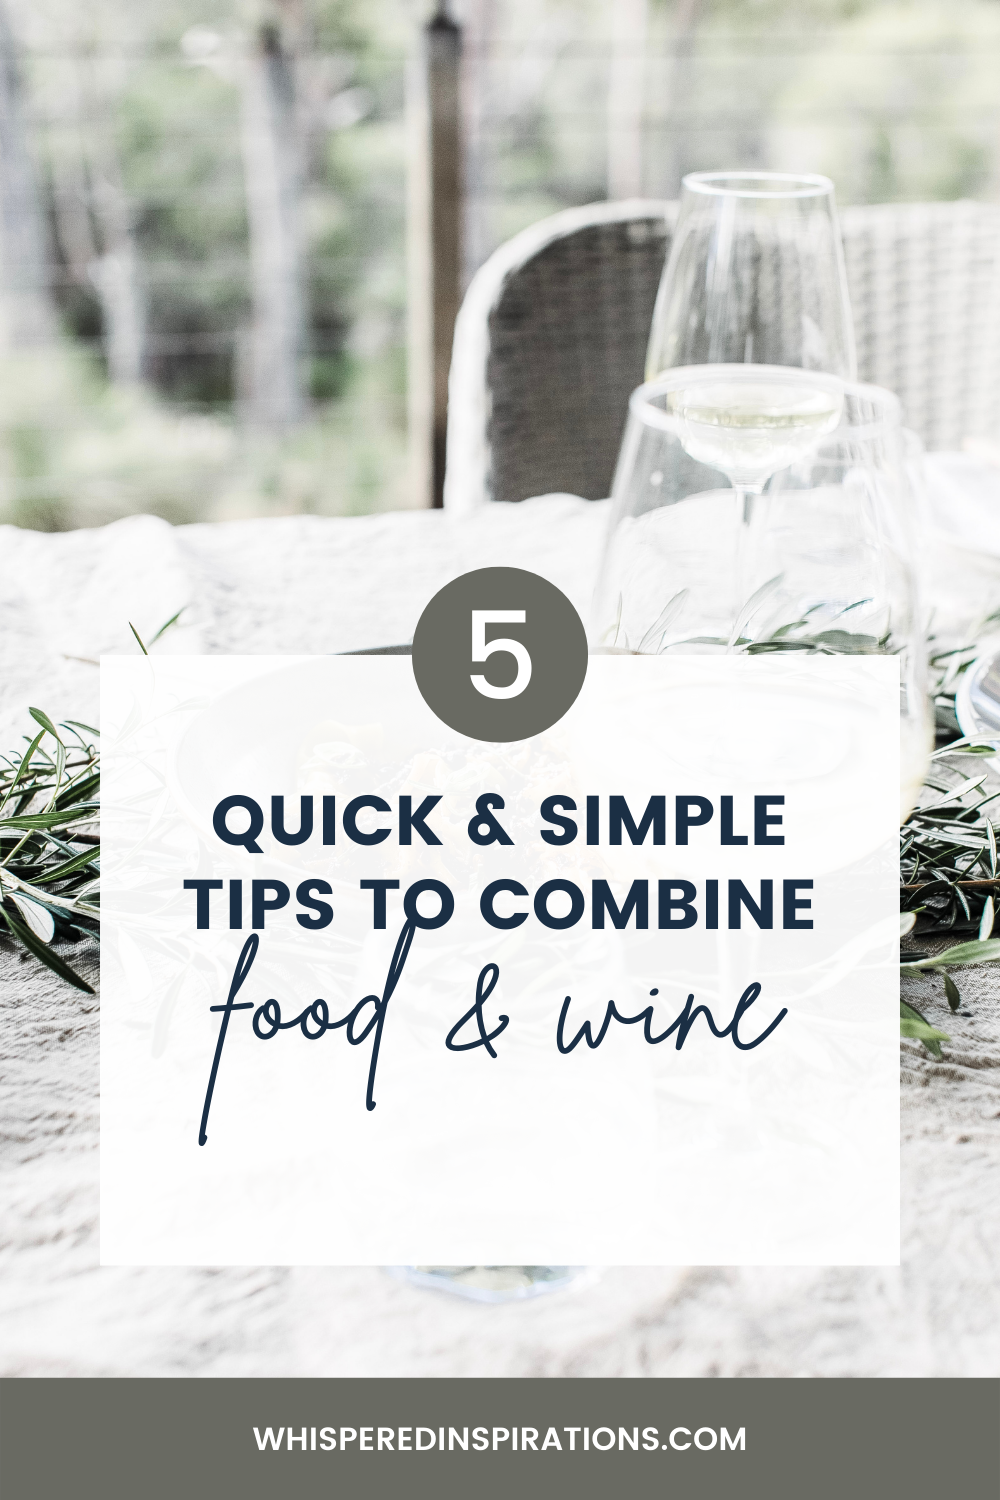 A beautiful tablescape is set up outside. There is white wine and food. This article covers tips on how to combine with different types of food.